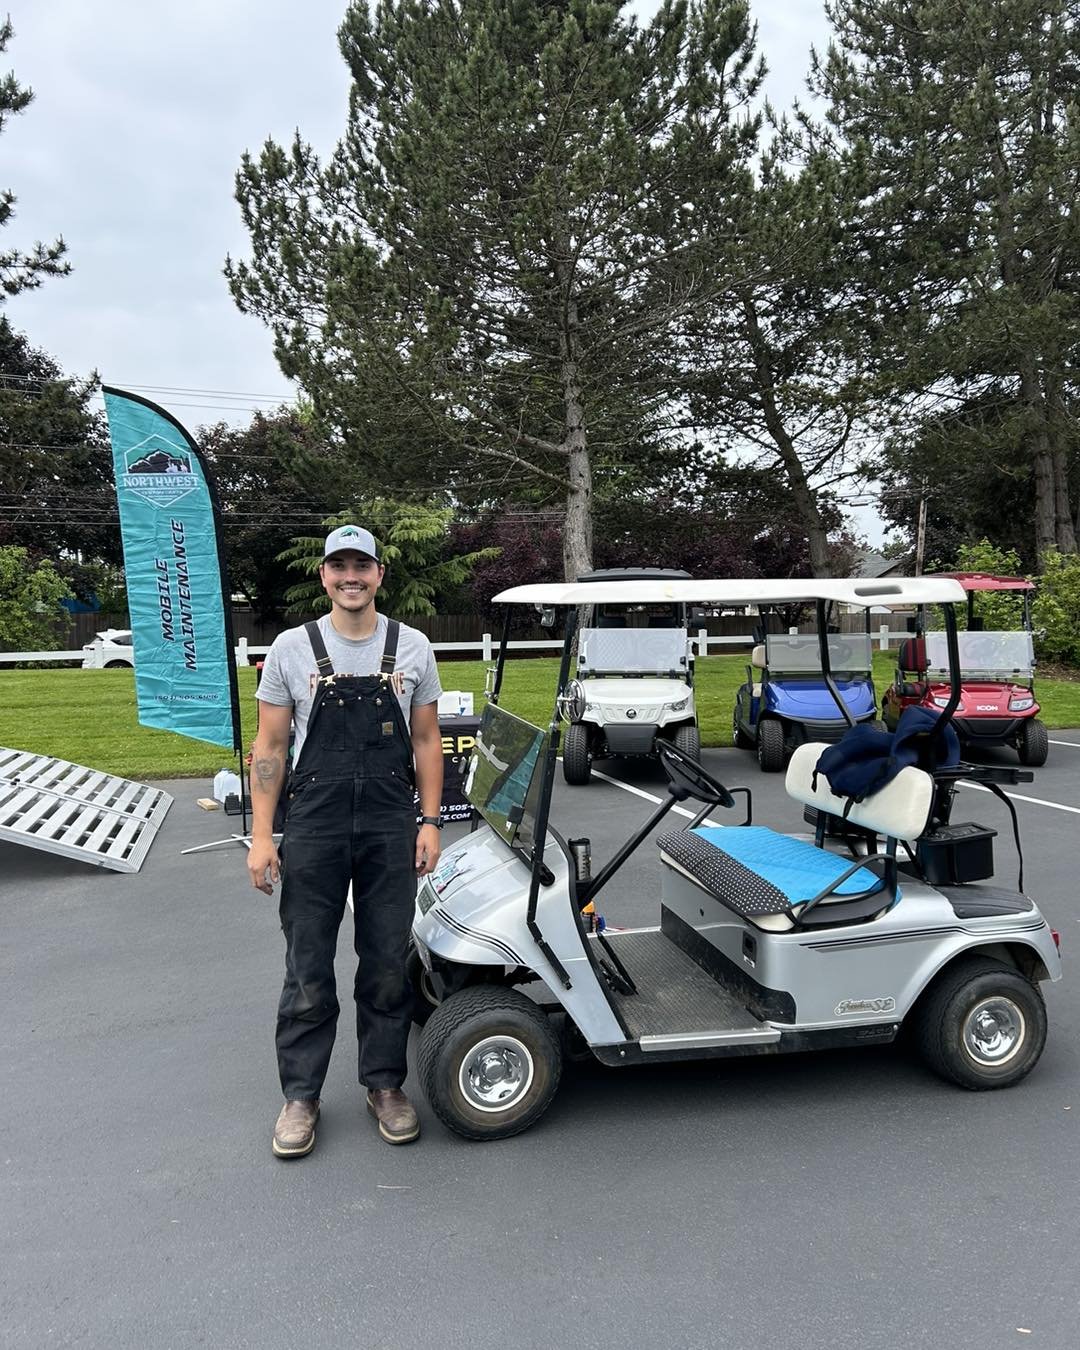 Swing by Claremont Golf Club for the Northwest Custom Carts mobile service day! We&rsquo;re offering 20 minute check ups for your cart covering the essentials, and Aaron is available to answer any questions or schedule appointments for larger service